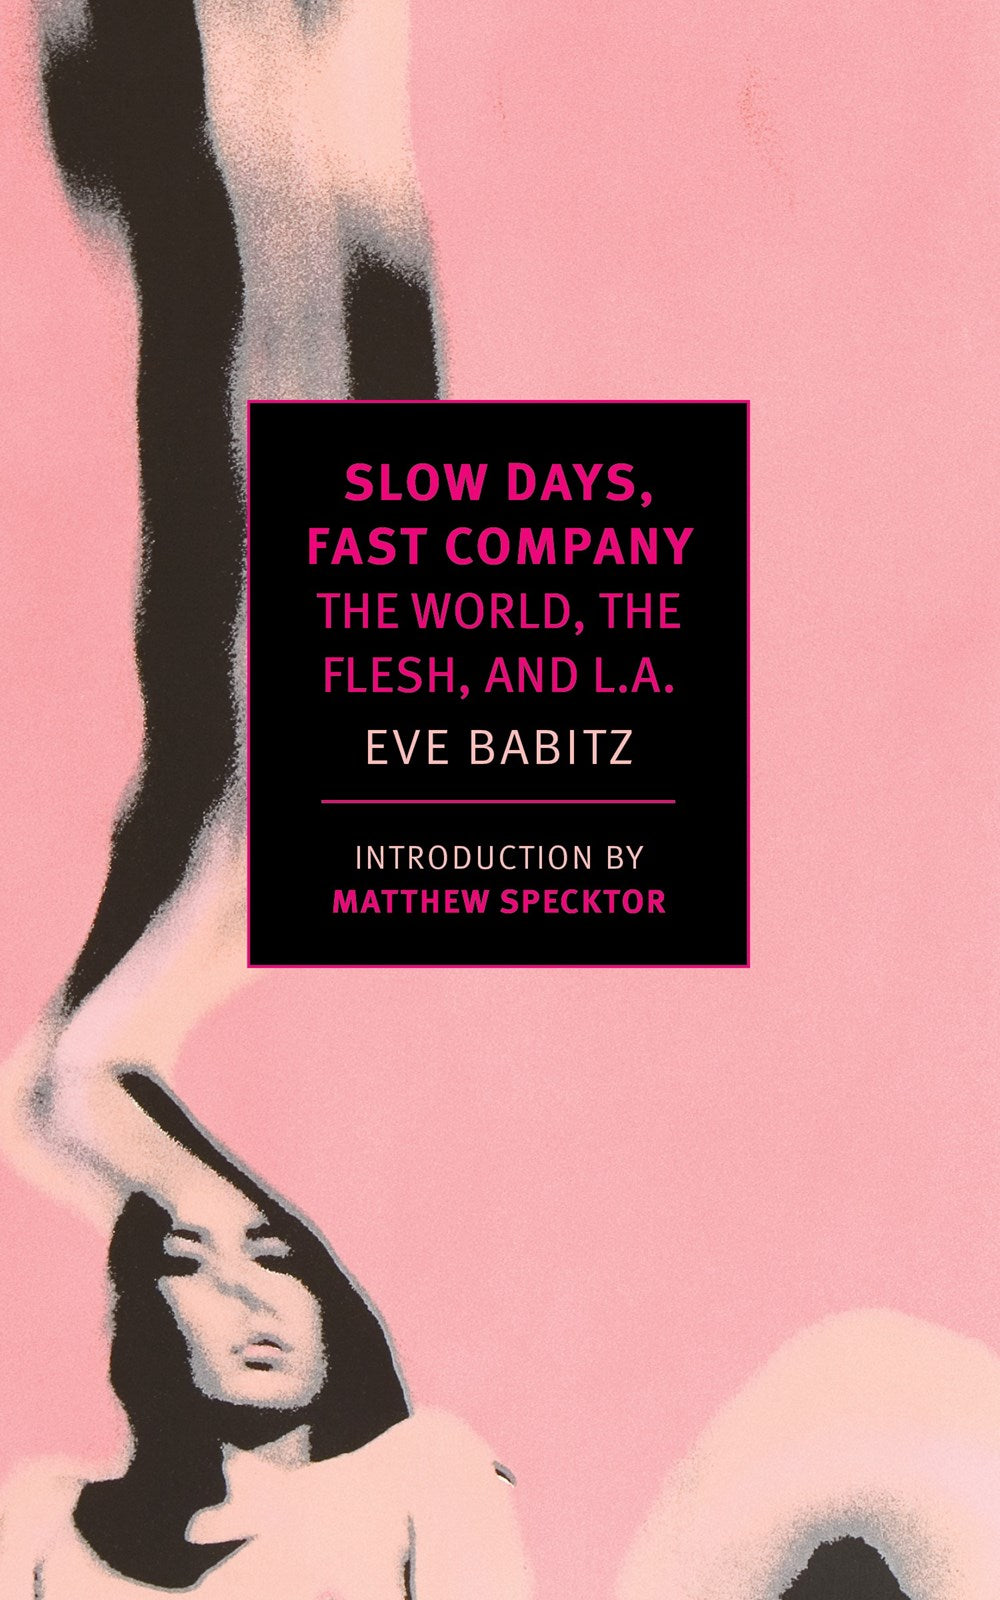 Slow Days, Fast Company: The World, The Flesh and L.A. by Eve Babitz